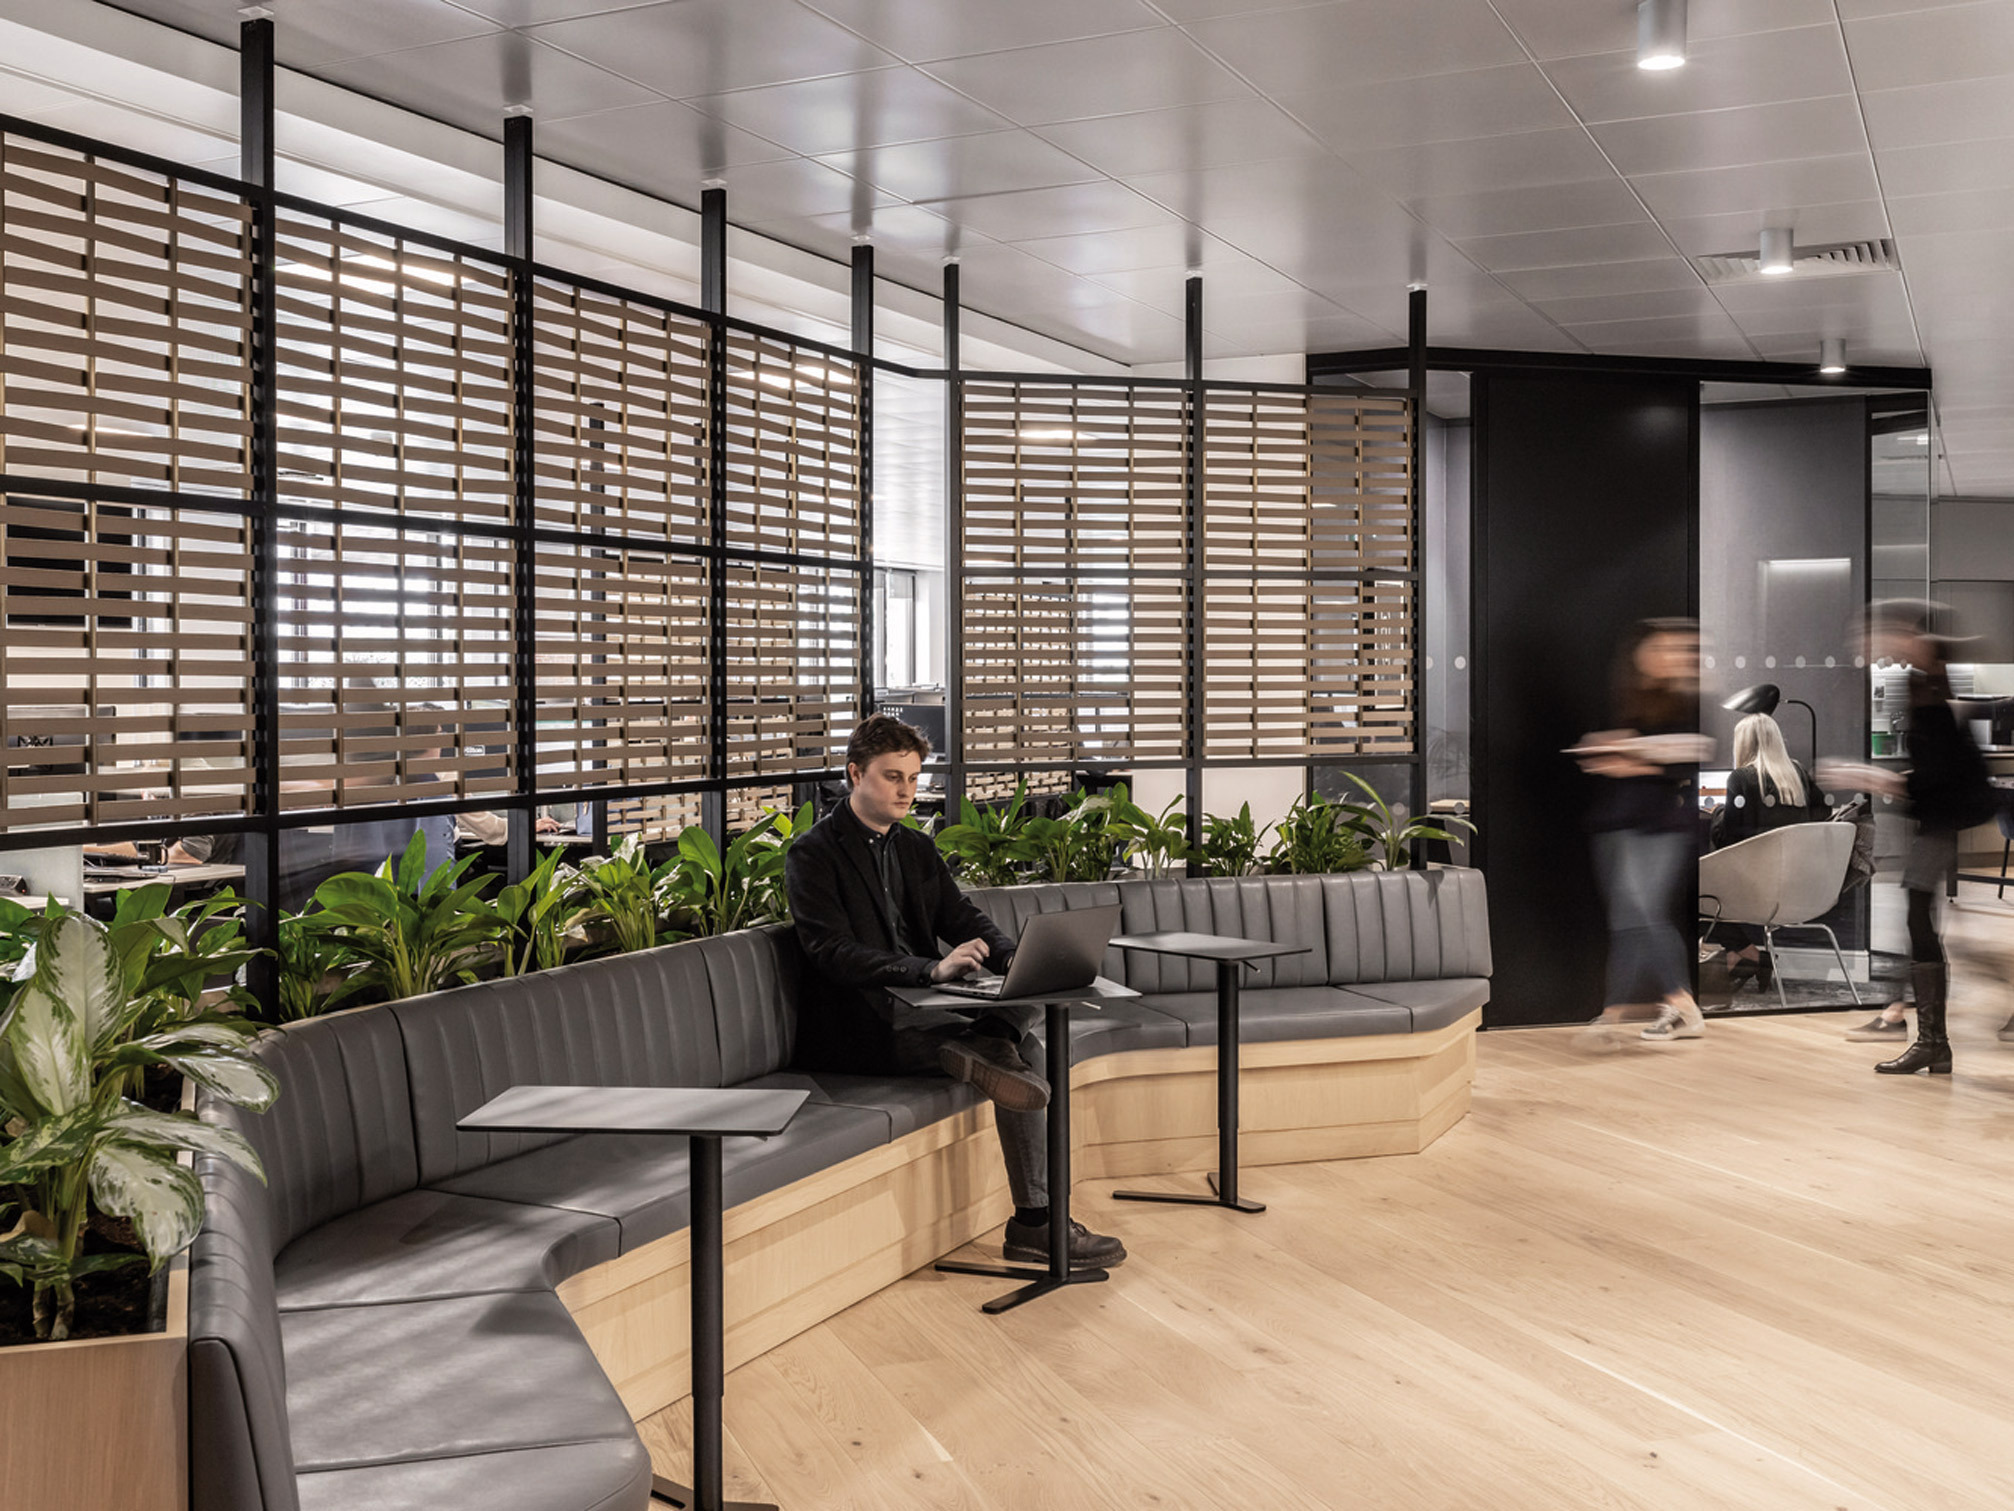 Modern office lounge area featuring sleek wooden slatted room dividers, plush gray modular seating, and abundant greenery. A professional works on a laptop, suggesting a collaborative and flexible workspace. Ambient lighting and a blurred background convey a dynamic atmosphere.